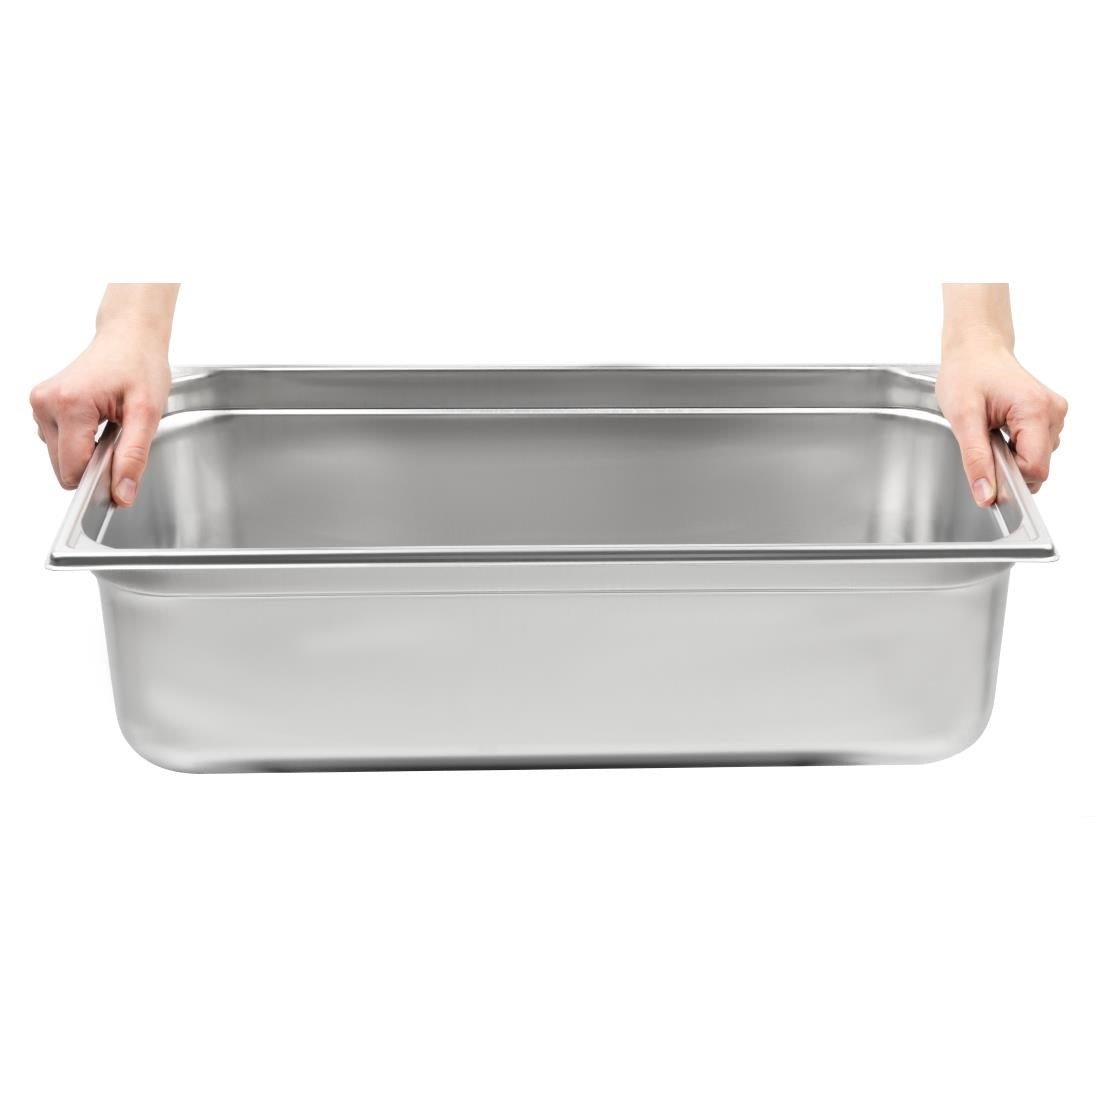 Bourgeat Stainless Steel 1/1 Gastronorm Pan 150mm JD Catering Equipment Solutions Ltd